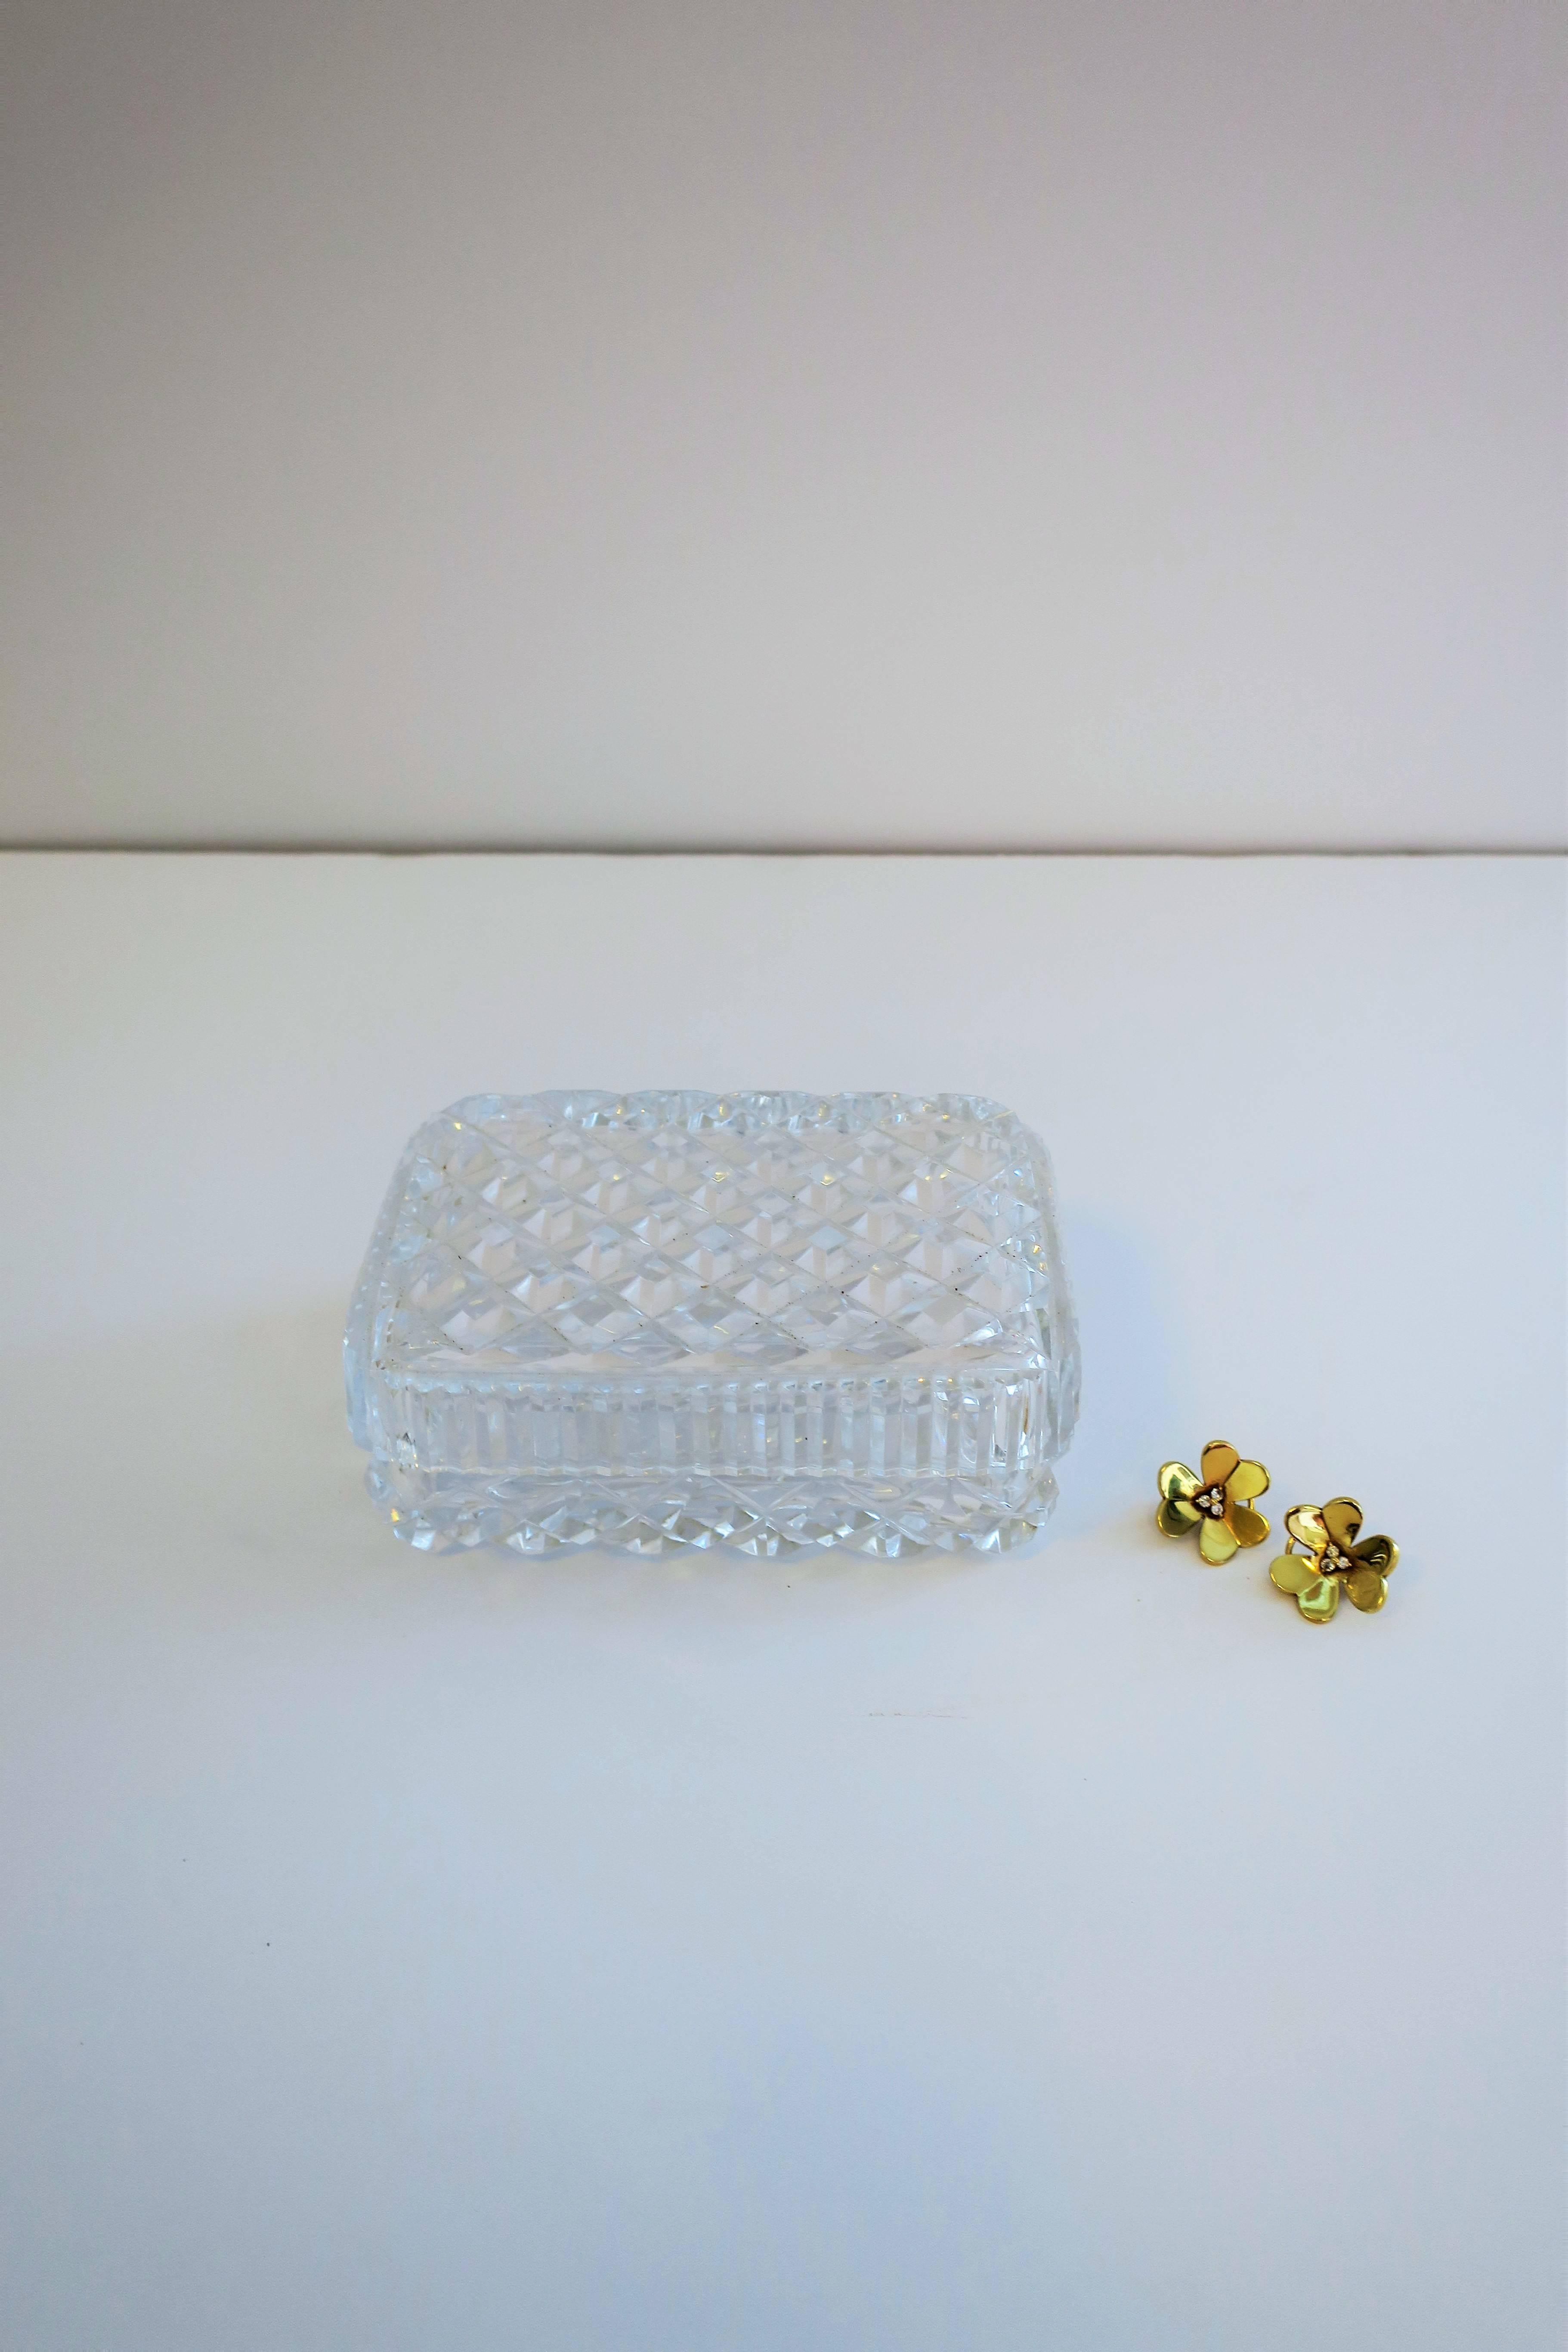 A beautiful crystal jewelry box with a diamond 'quilted' design, circa late 20th century. Nice for jewelry or other small items on a desk, vanity, dresser, nightstand table, etc. Dimensions: 3